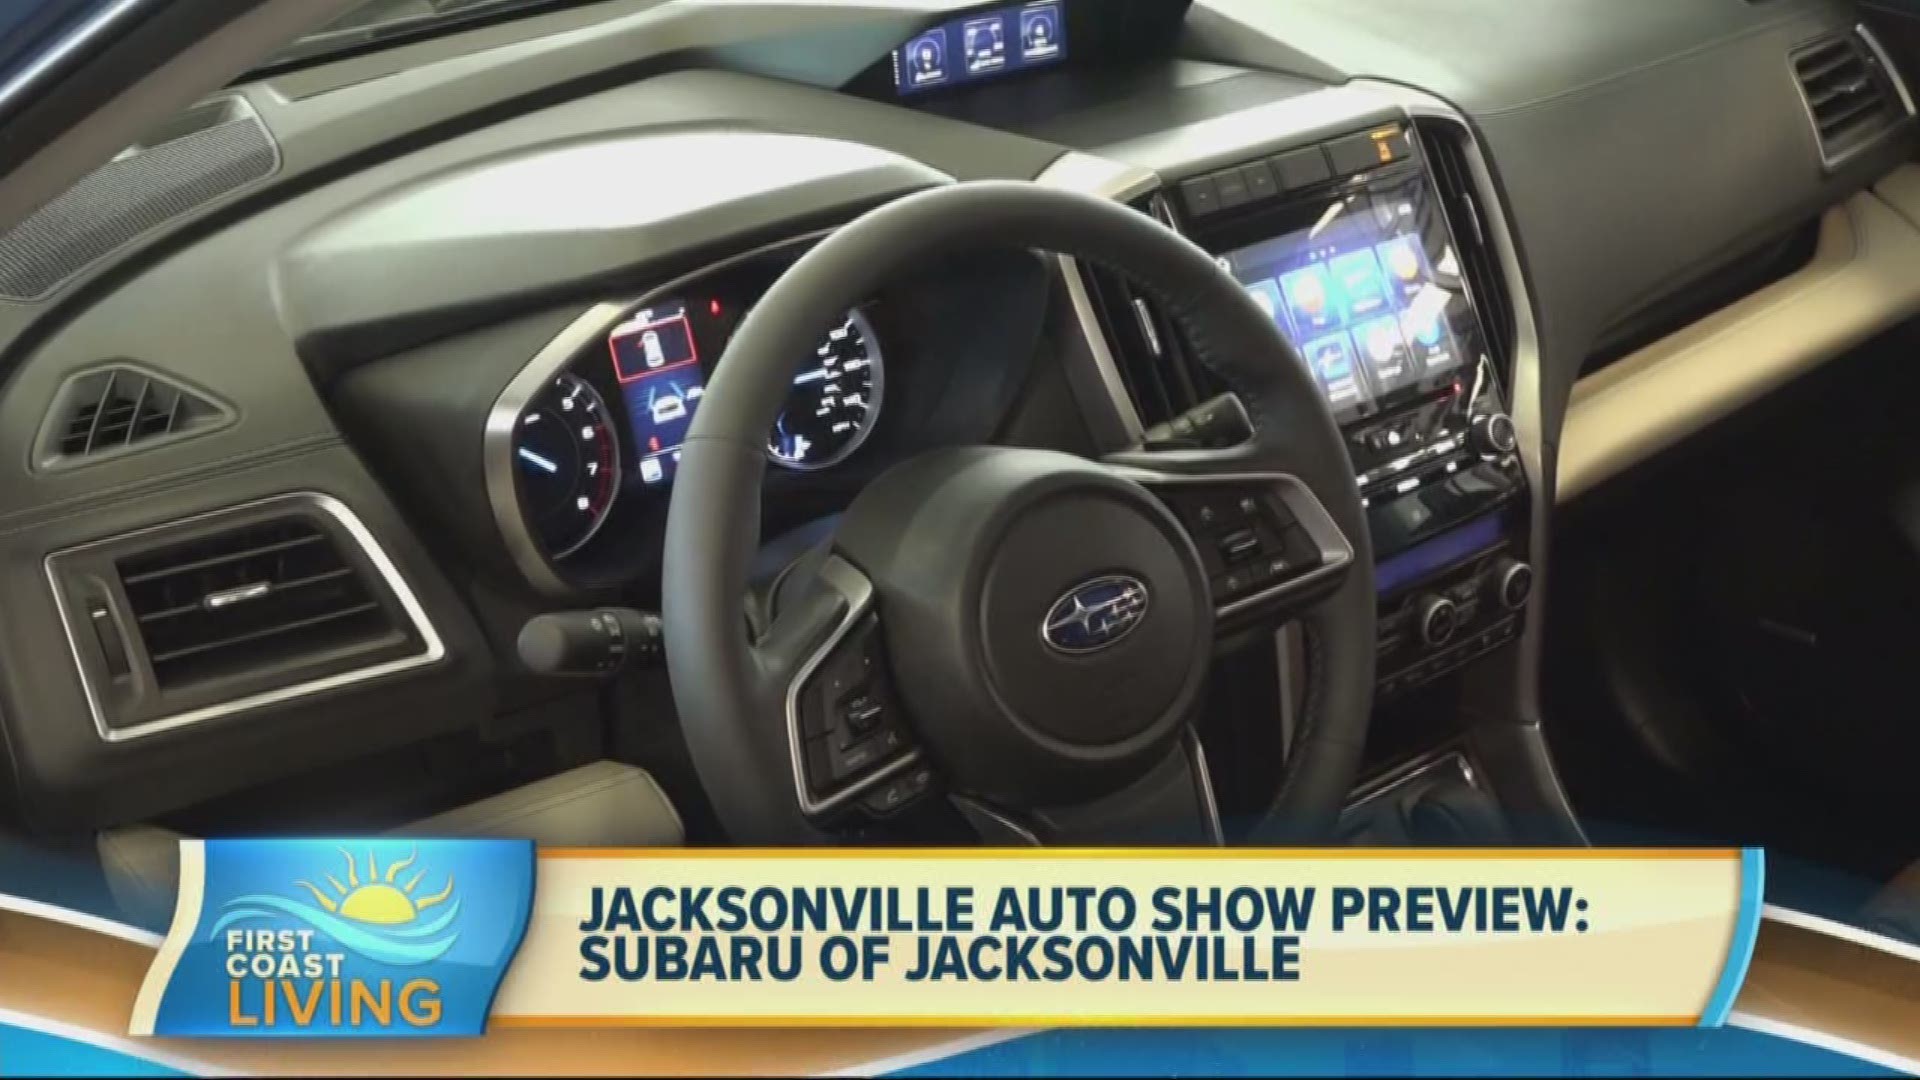 Make sure you check out the Jacksonville International Auto Show this weekend!